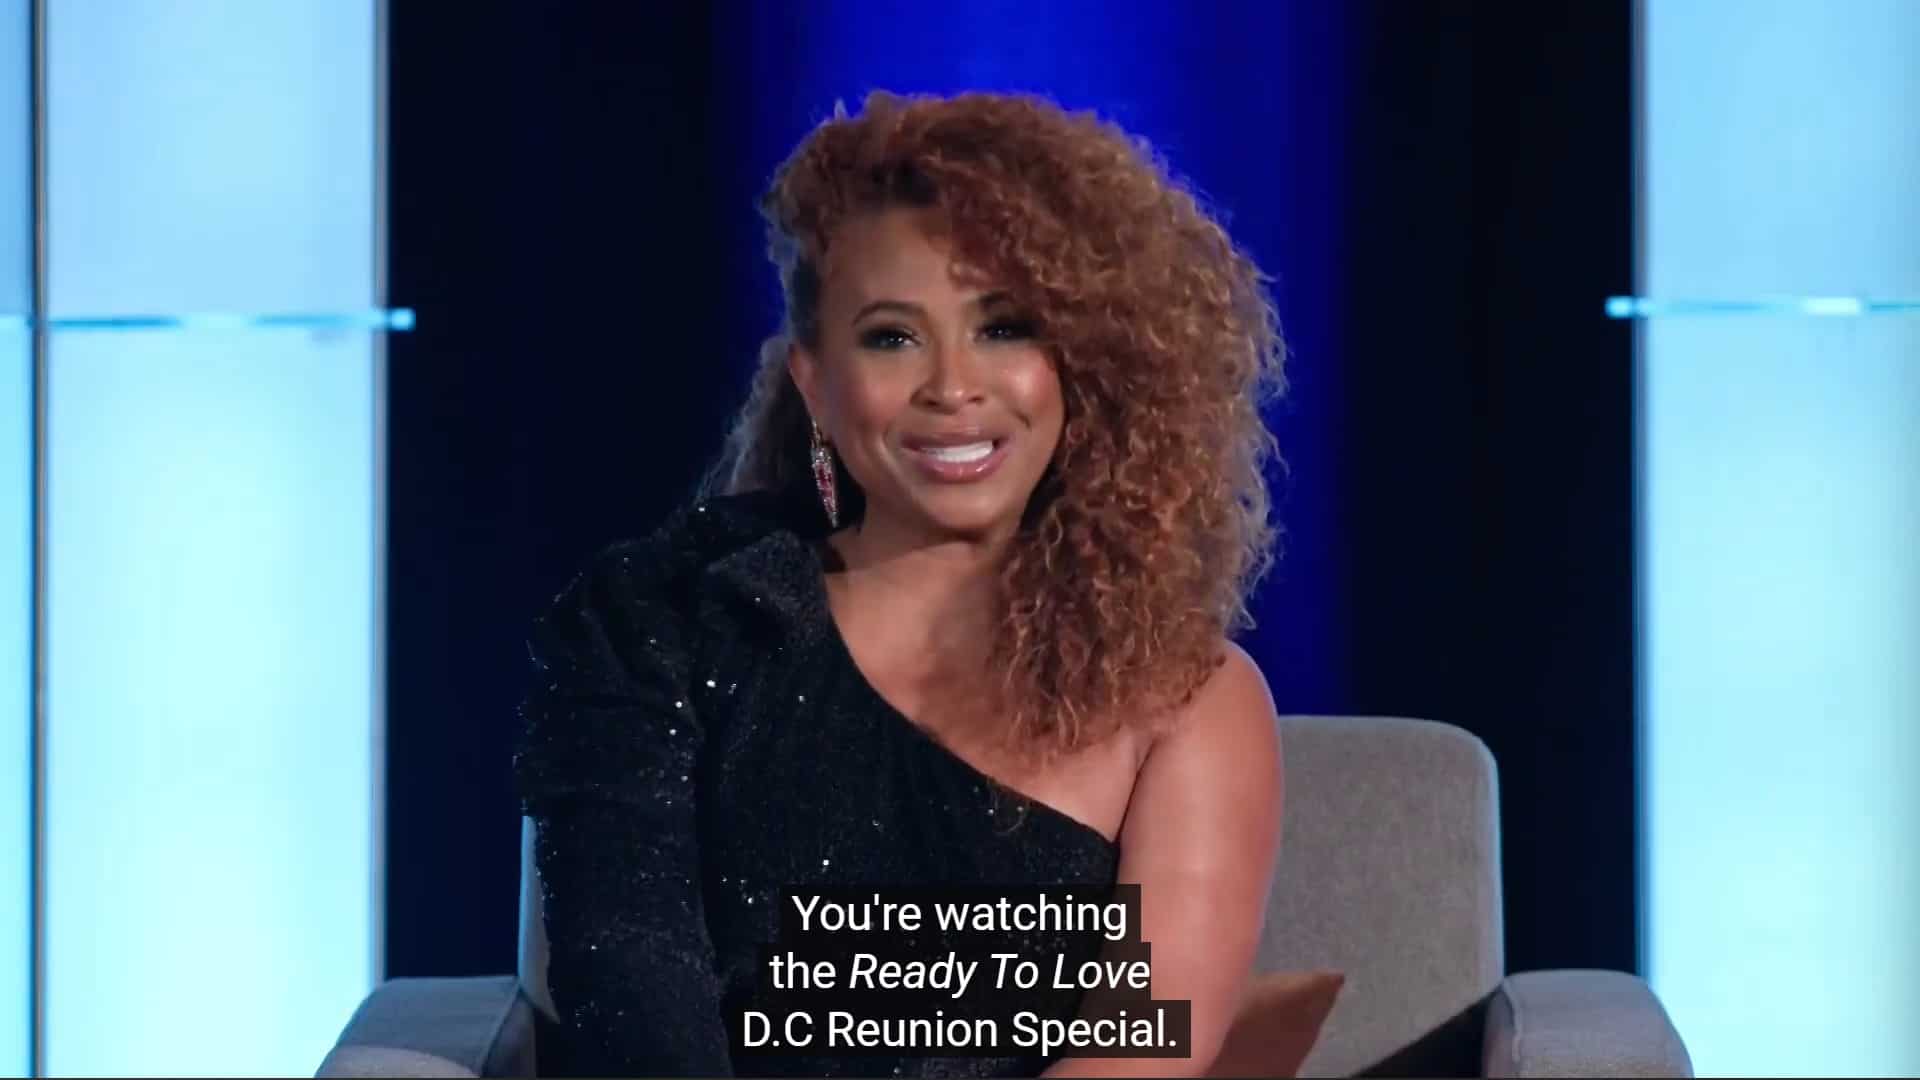 Tanika welcoming people to the Ready To Love DC reunion